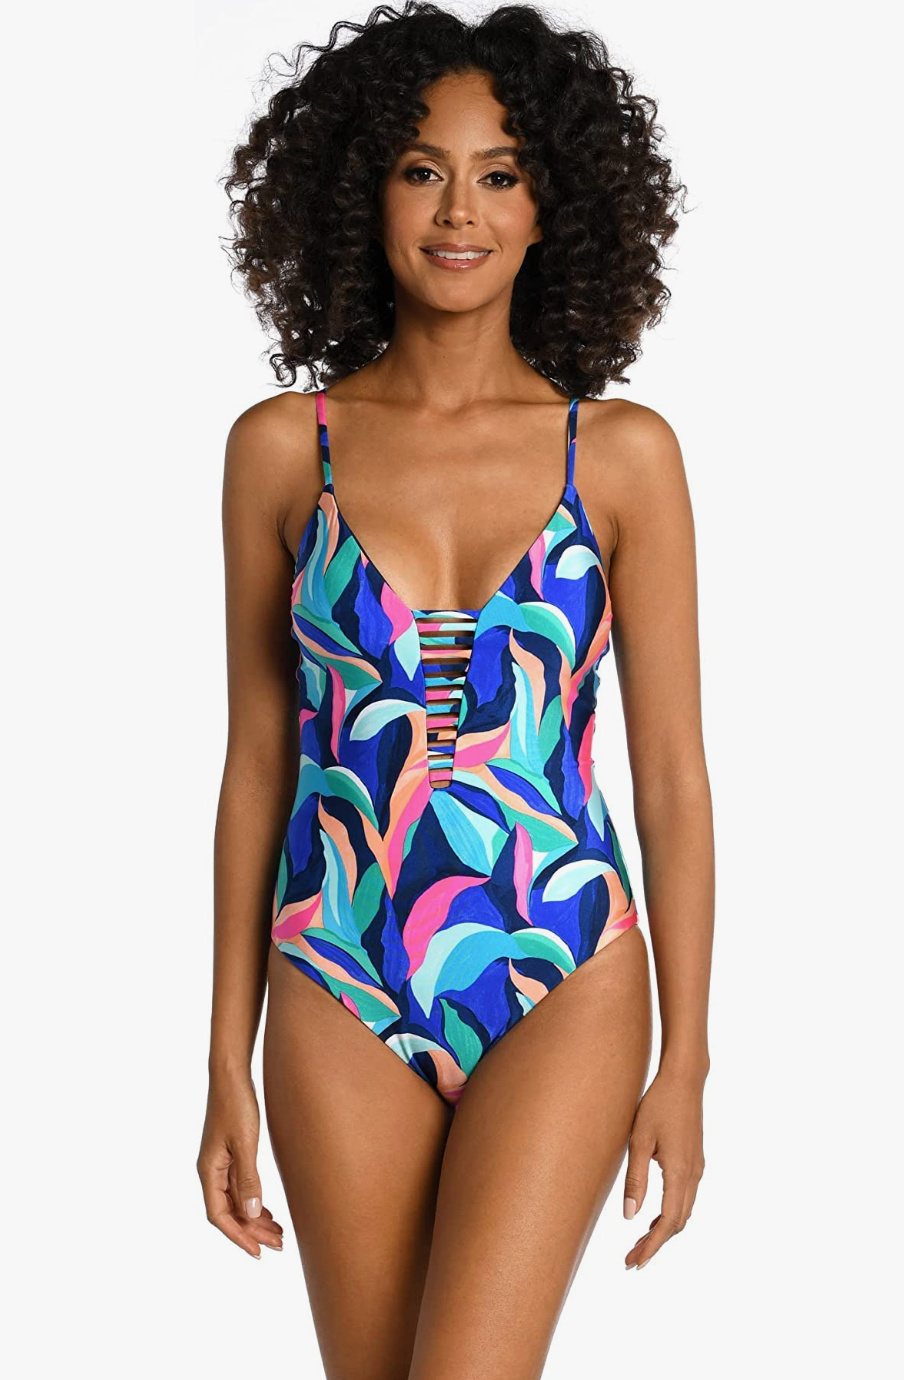 Tips and Tricks to Find the Best Swimsuit for Your Body Type